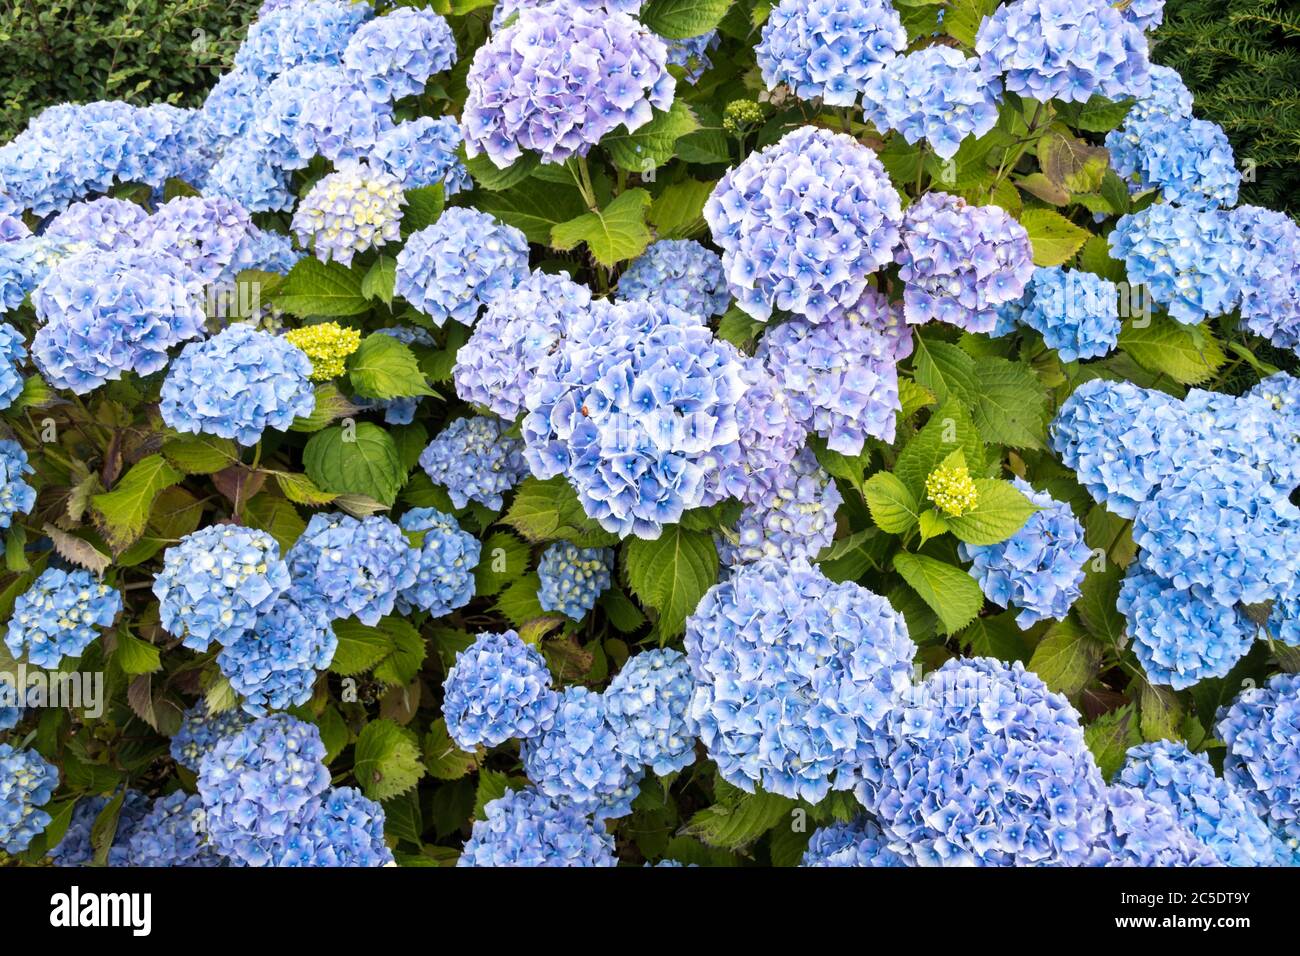 Blue flowers on a mophead Hydrangea macrophylla, produced by it growing in acid soil conditions. Stock Photo